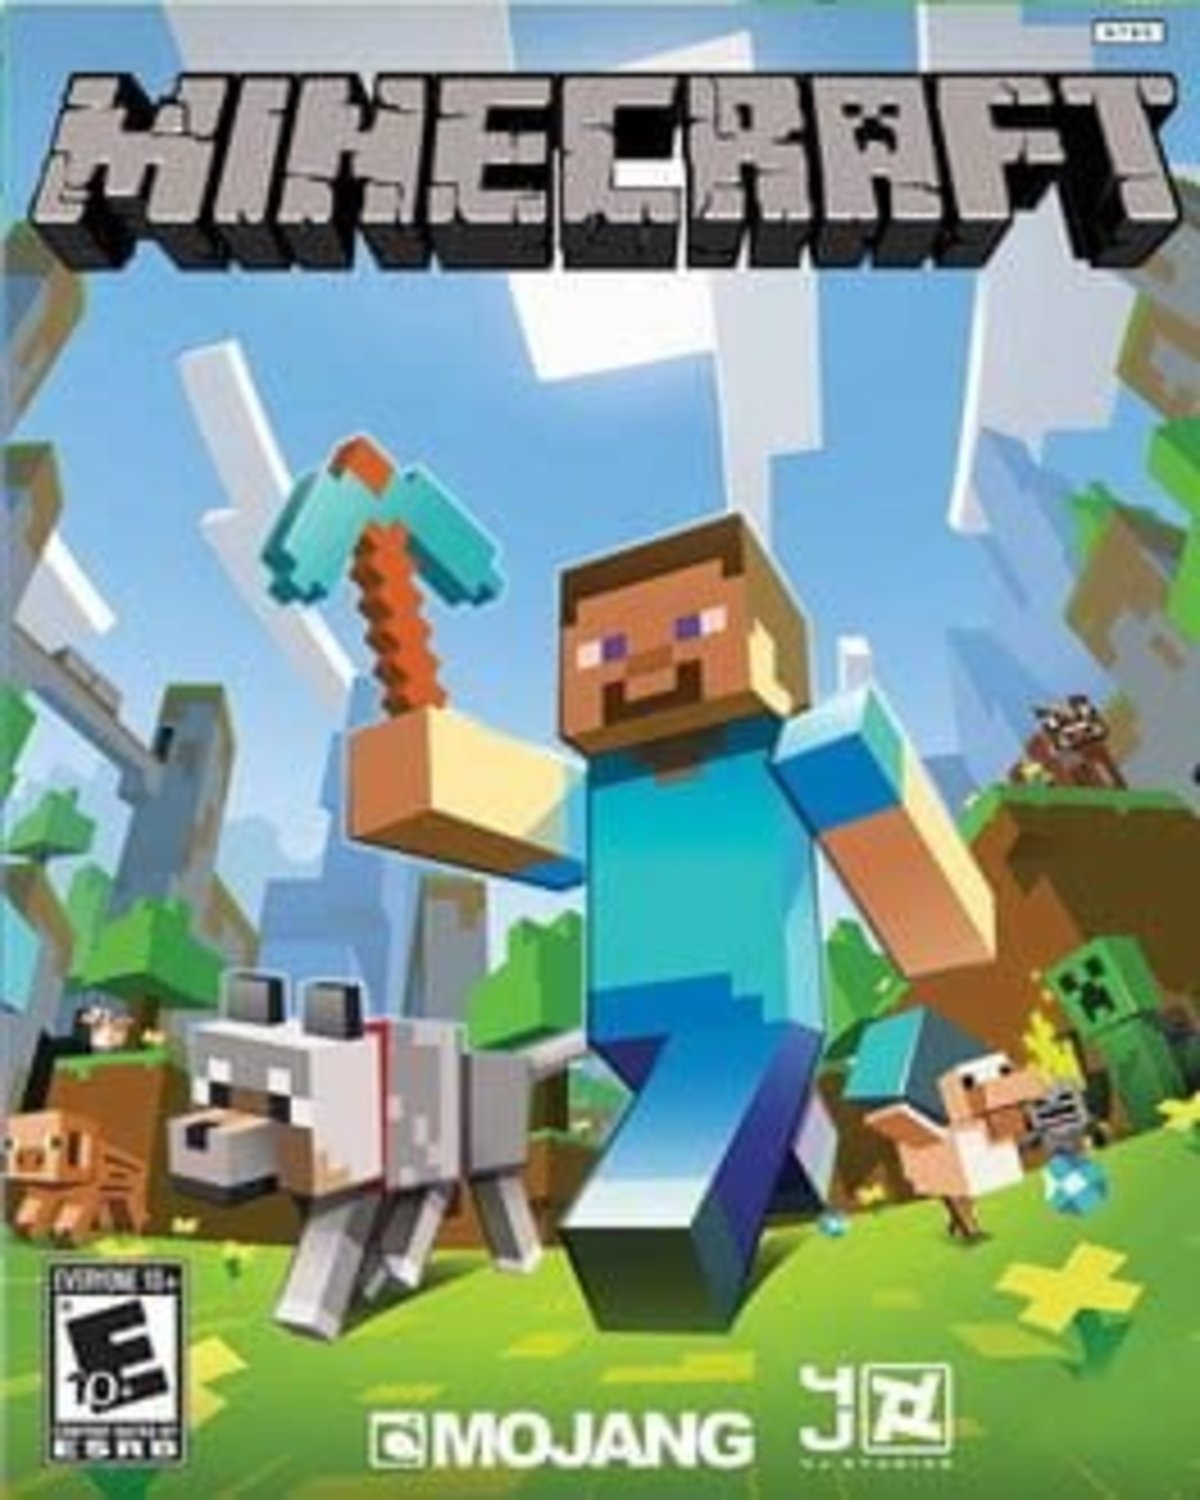 The new big update for Minecraft already has a release date